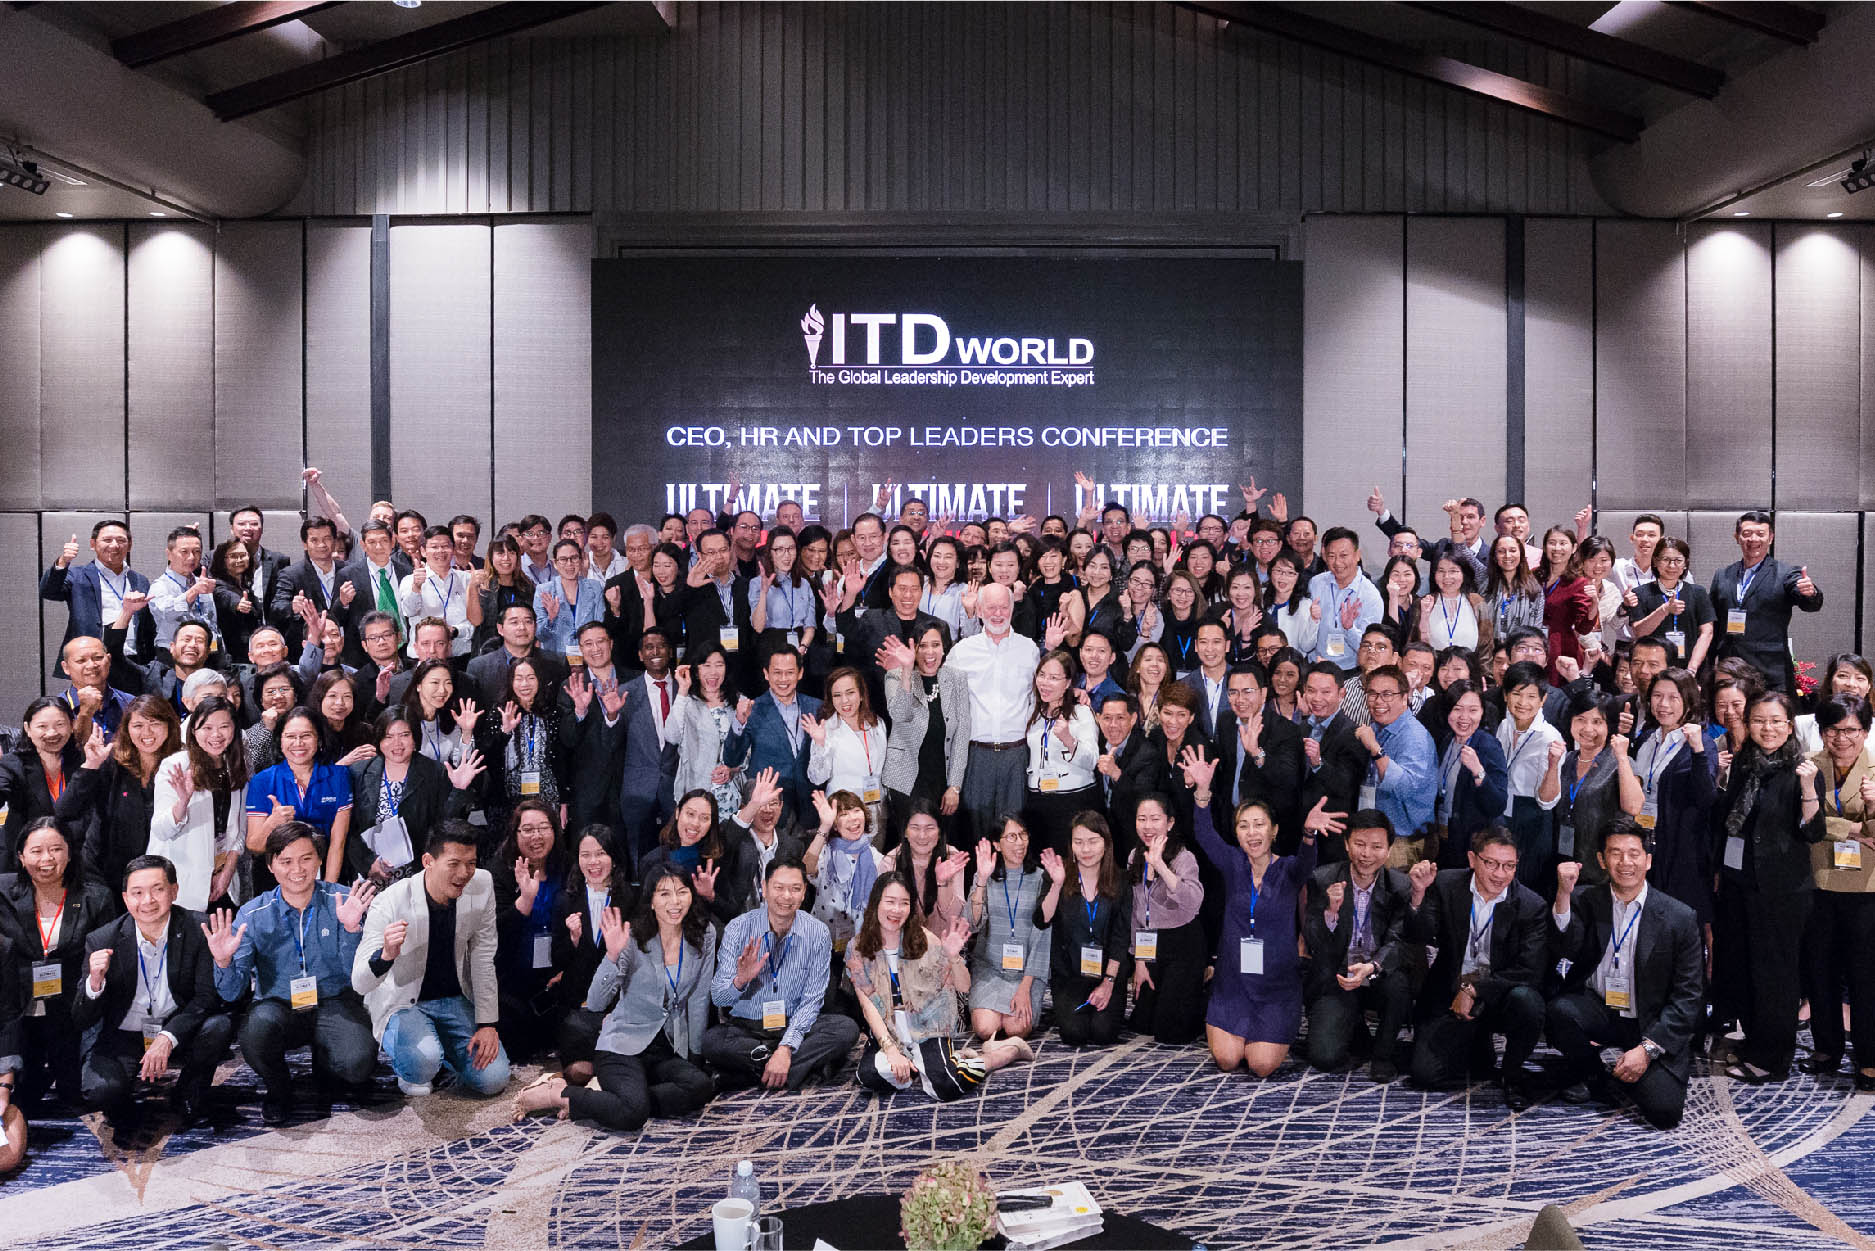 ITD World's leadership conference